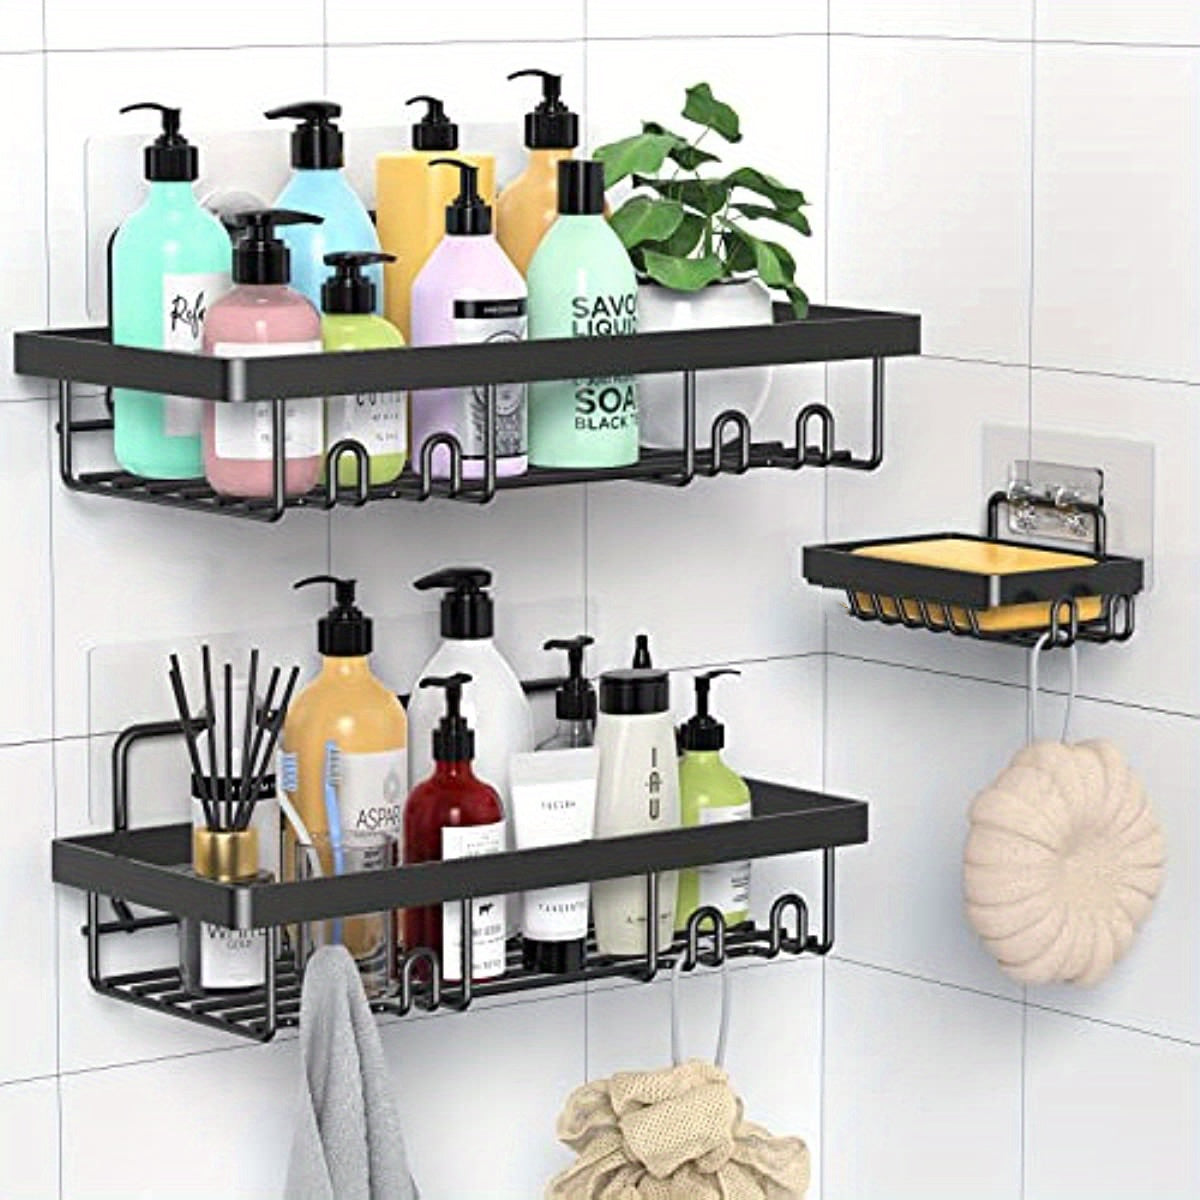 Upgrade Your Shower with Rustproof Storage: 2/3/4pcs Wall Mounted Adhesive Shower Organizer Shelf with Hooks & No Drilling! ➡ SO-00033